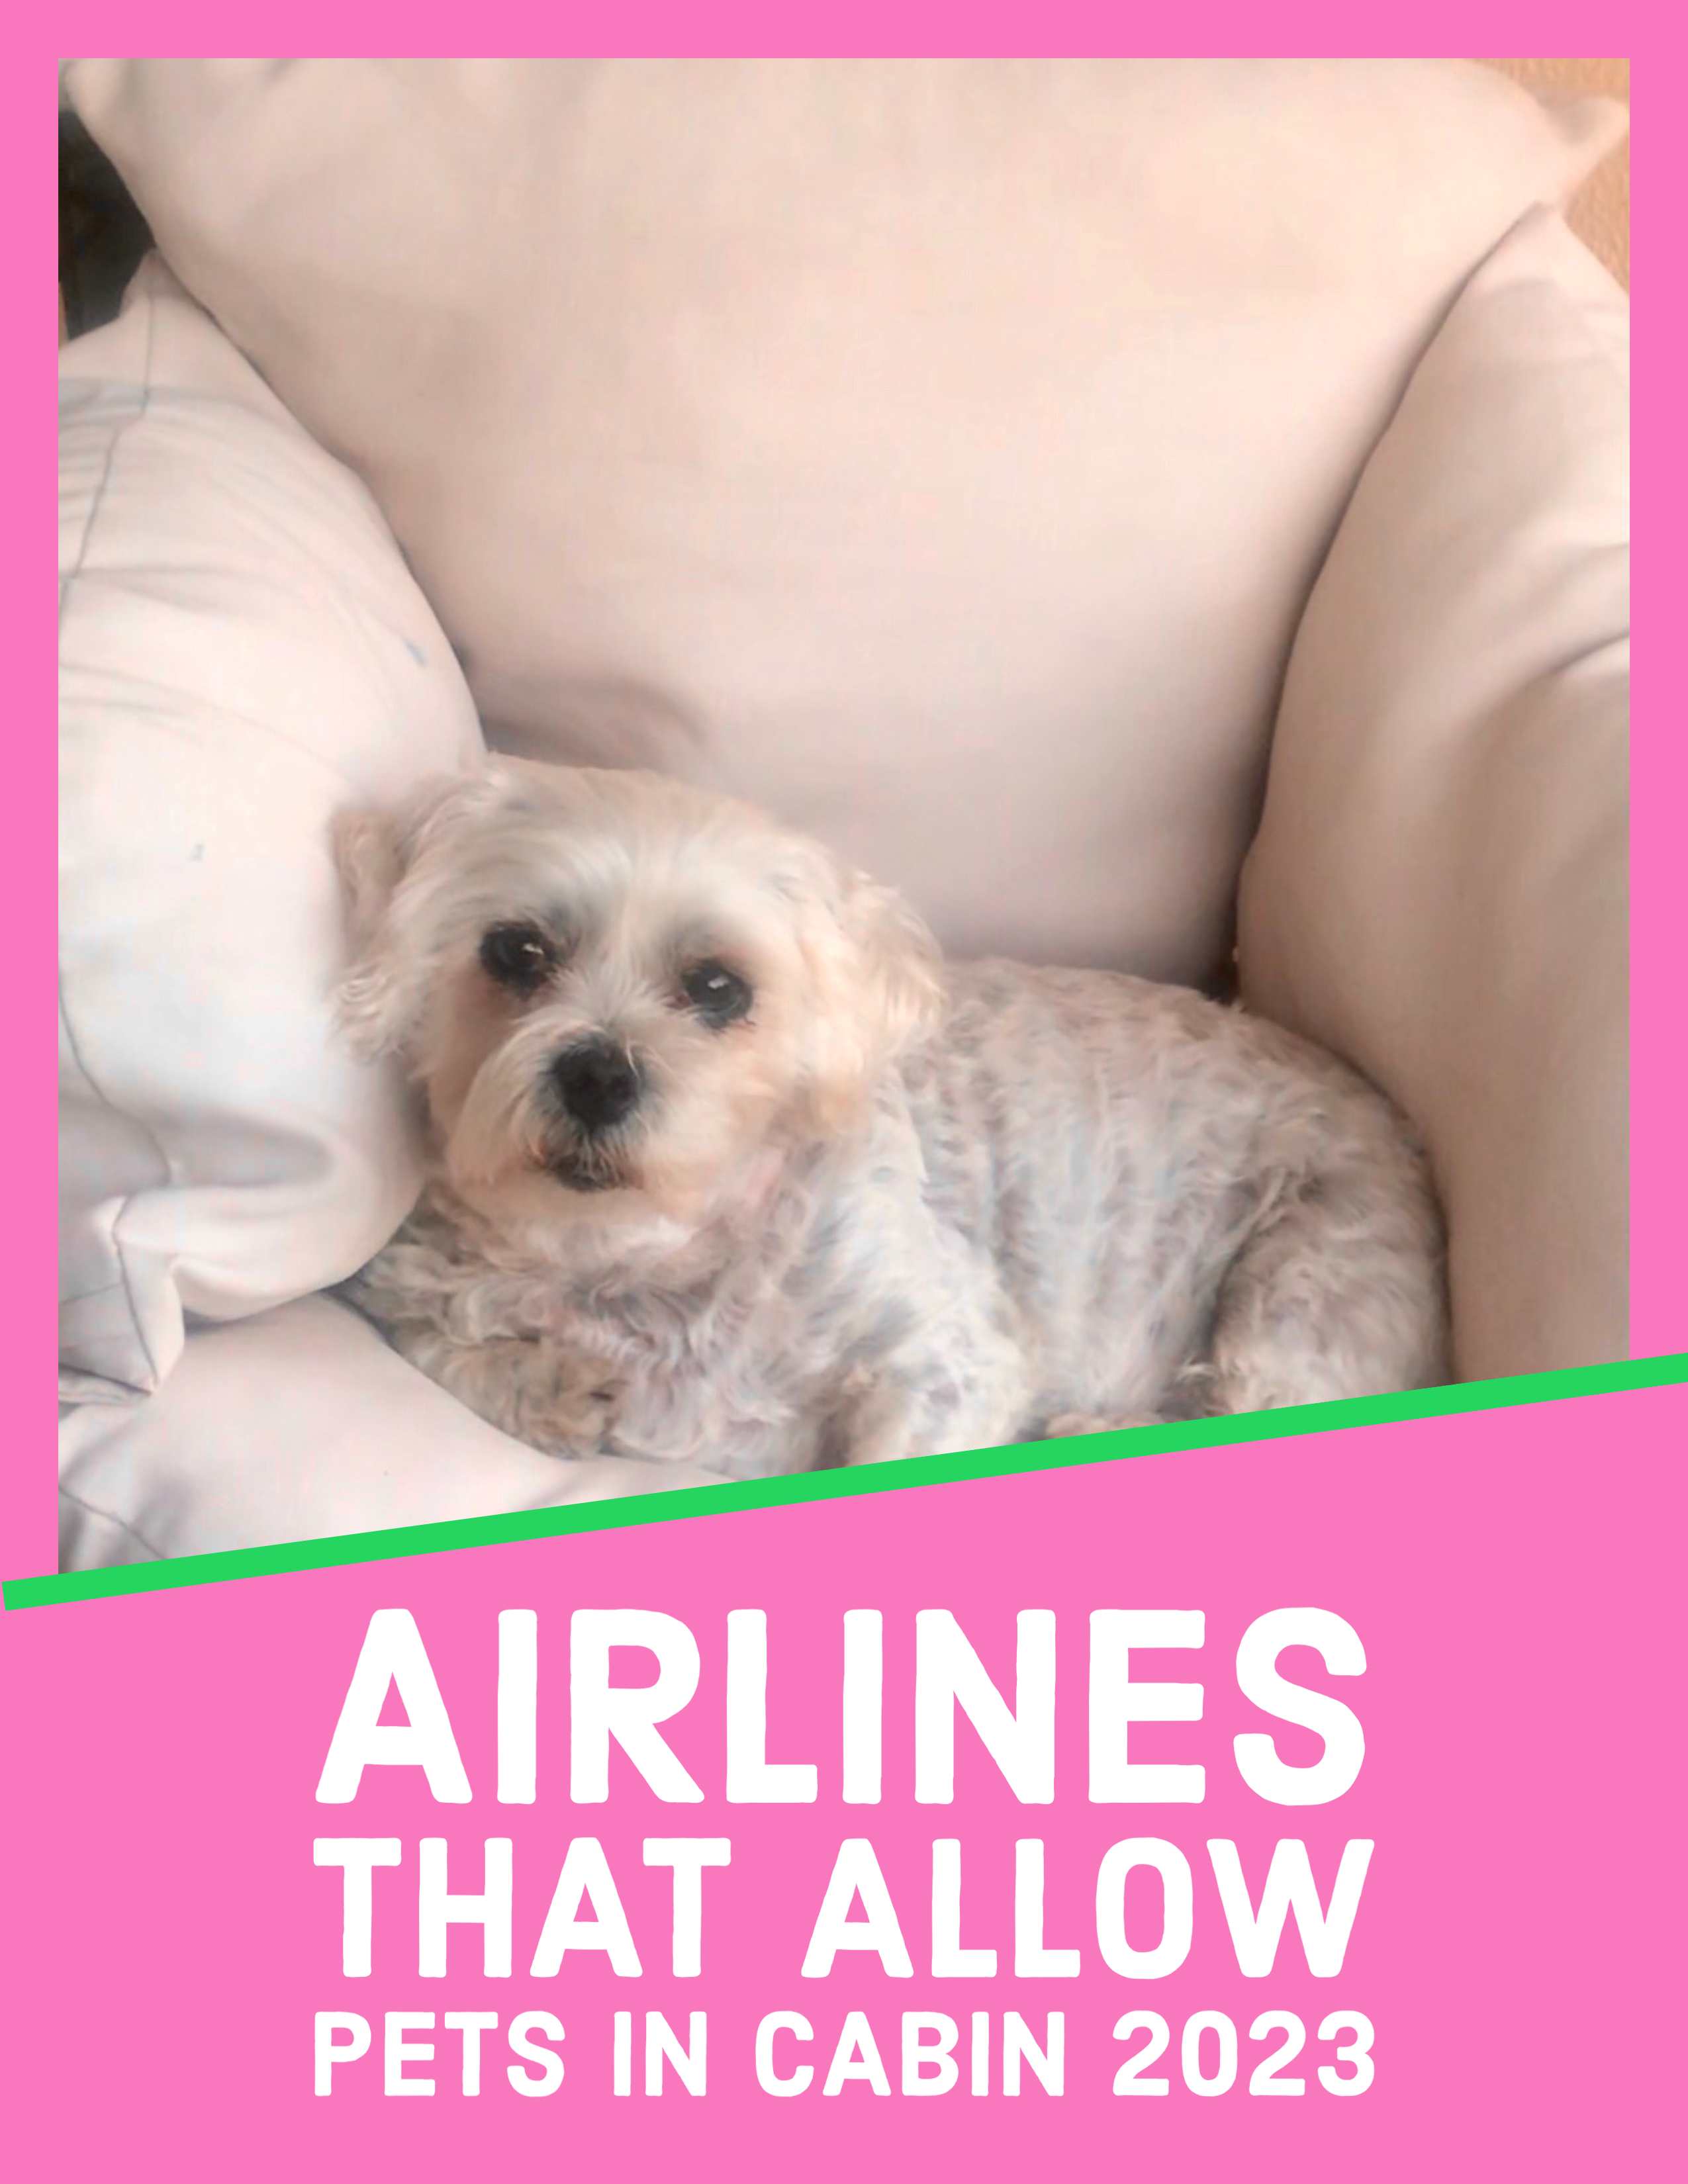 airlines allow pets flying in cabin 2023 cats and dogs in cabin airlines